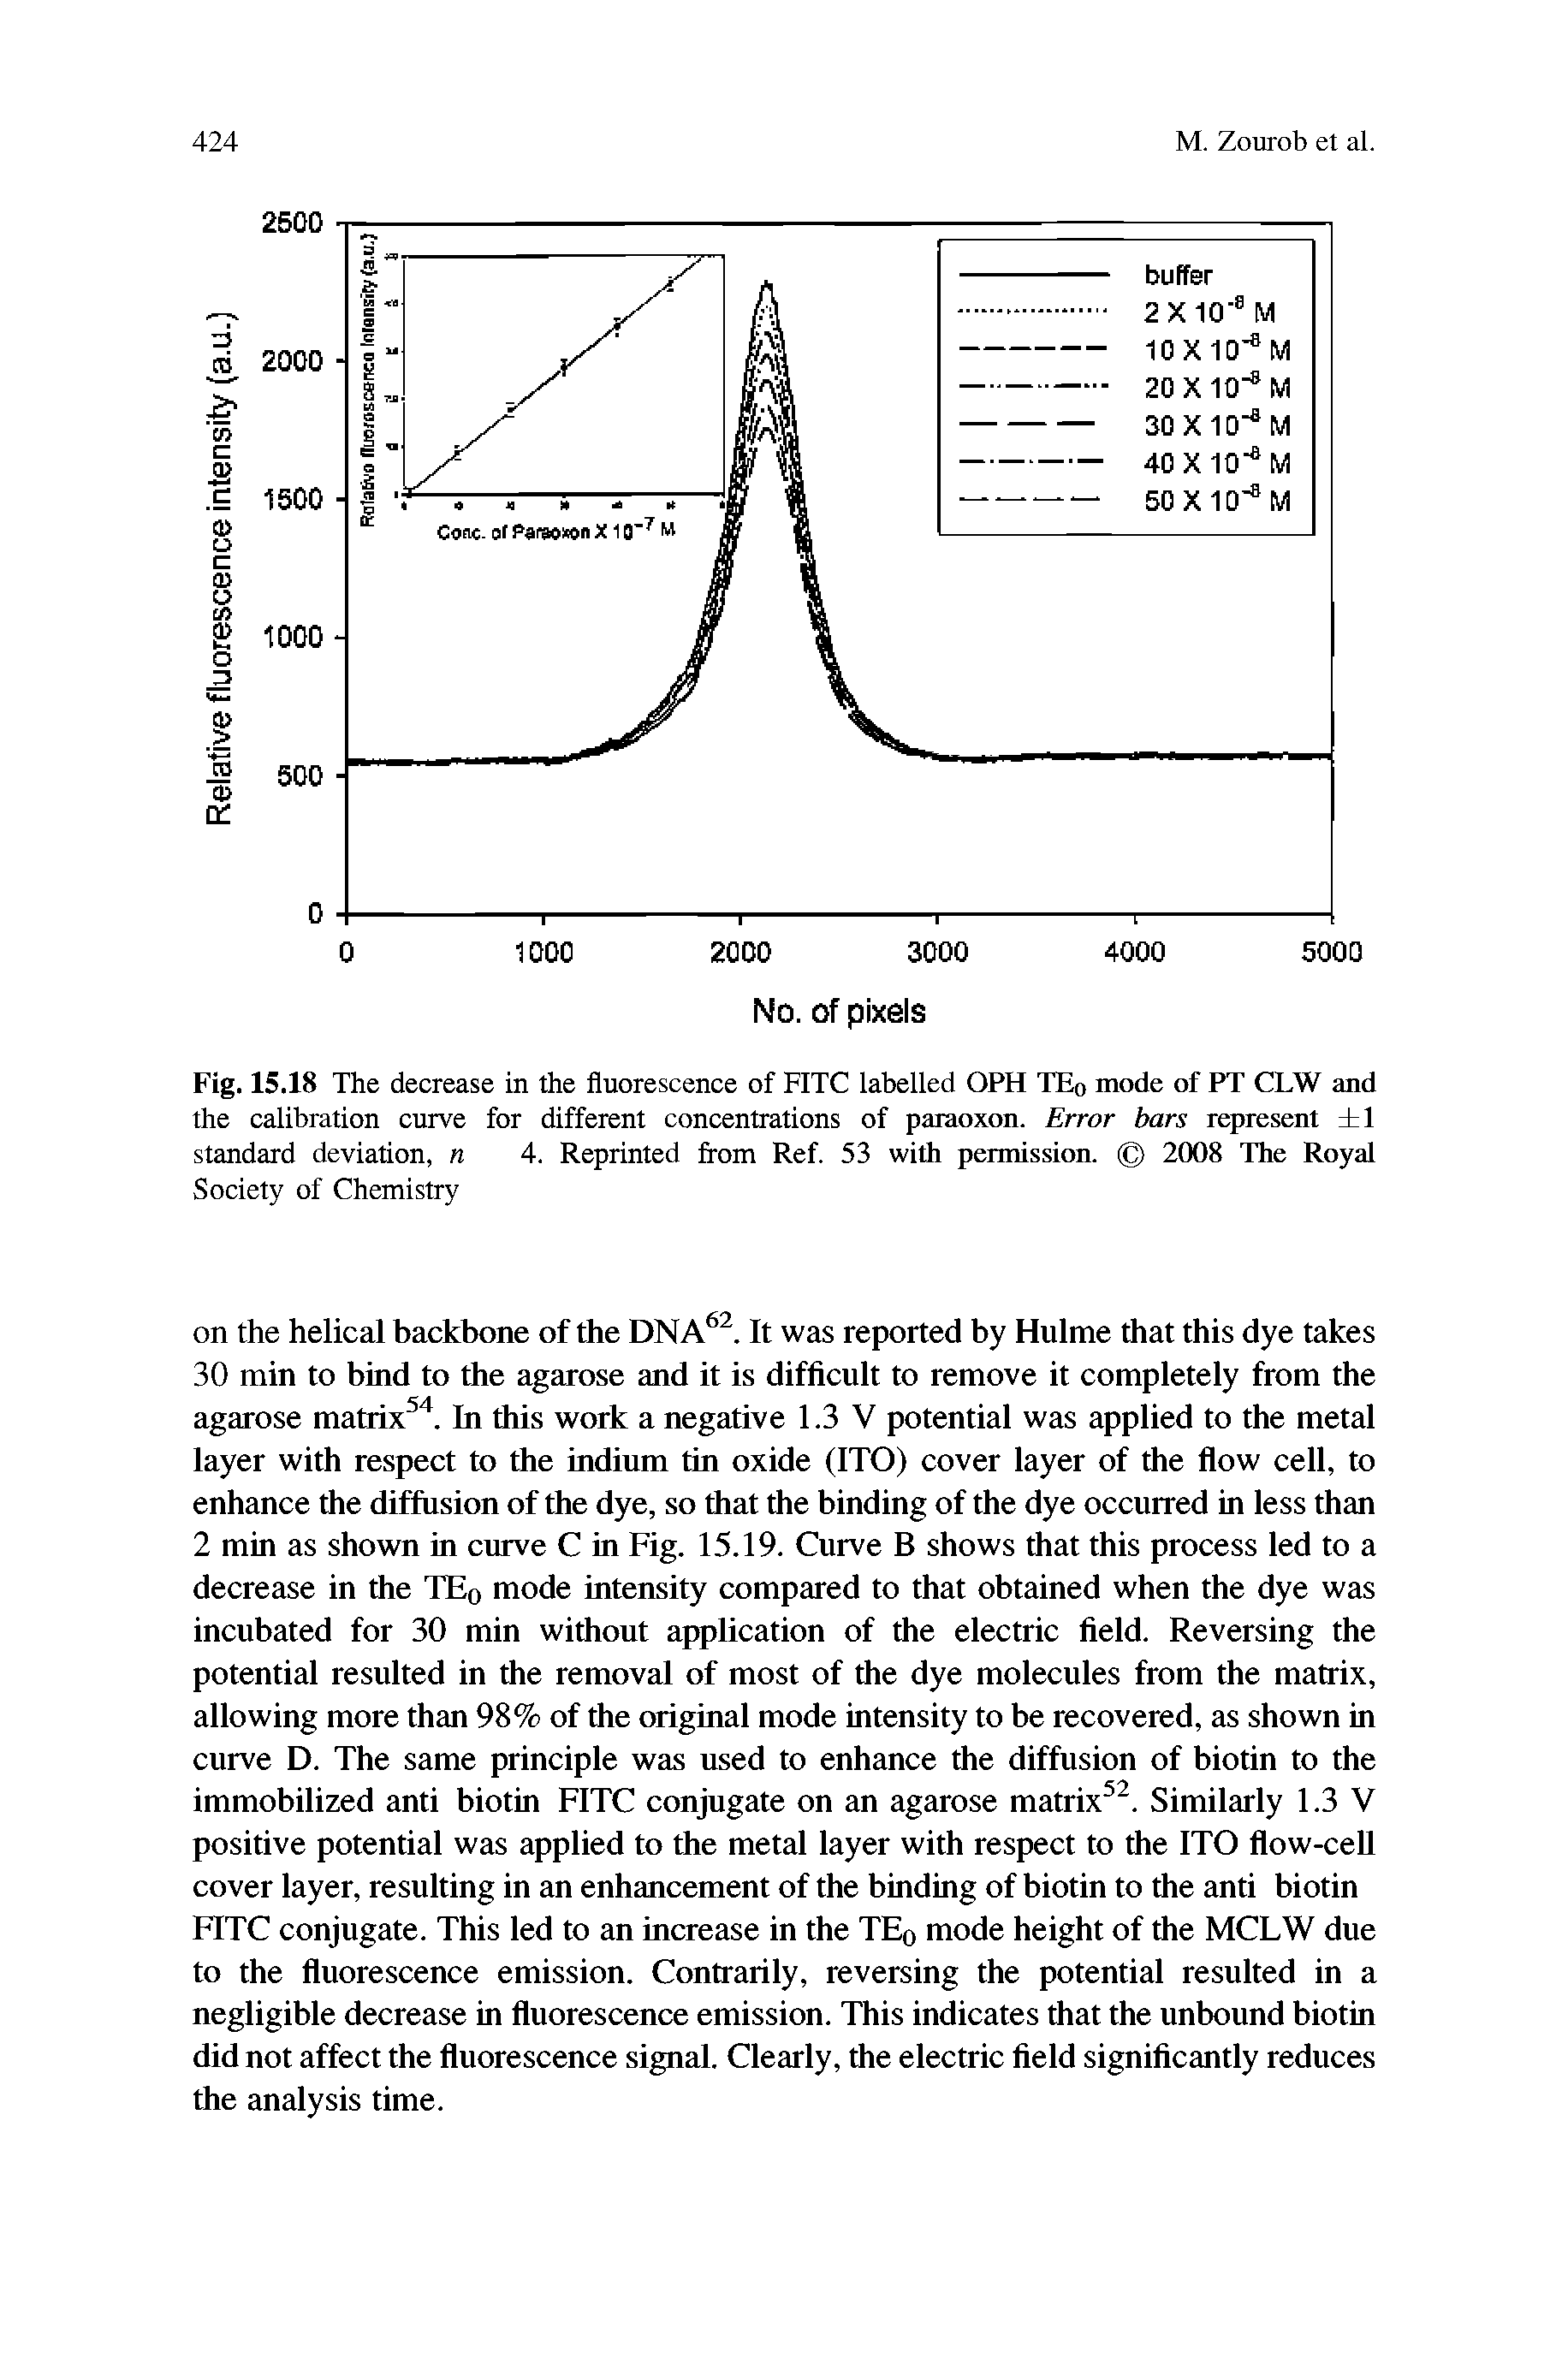 Fig. 15.18 The decrease in the fluorescence of FITC labelled OPH TE0 mode of PT CLW and the calibration curve for different concentrations of paraoxon. Error bars represent 1 standard deviation, n 4. Reprinted from Ref. 53 with permission. 2008 The Royal Society of Chemistry...